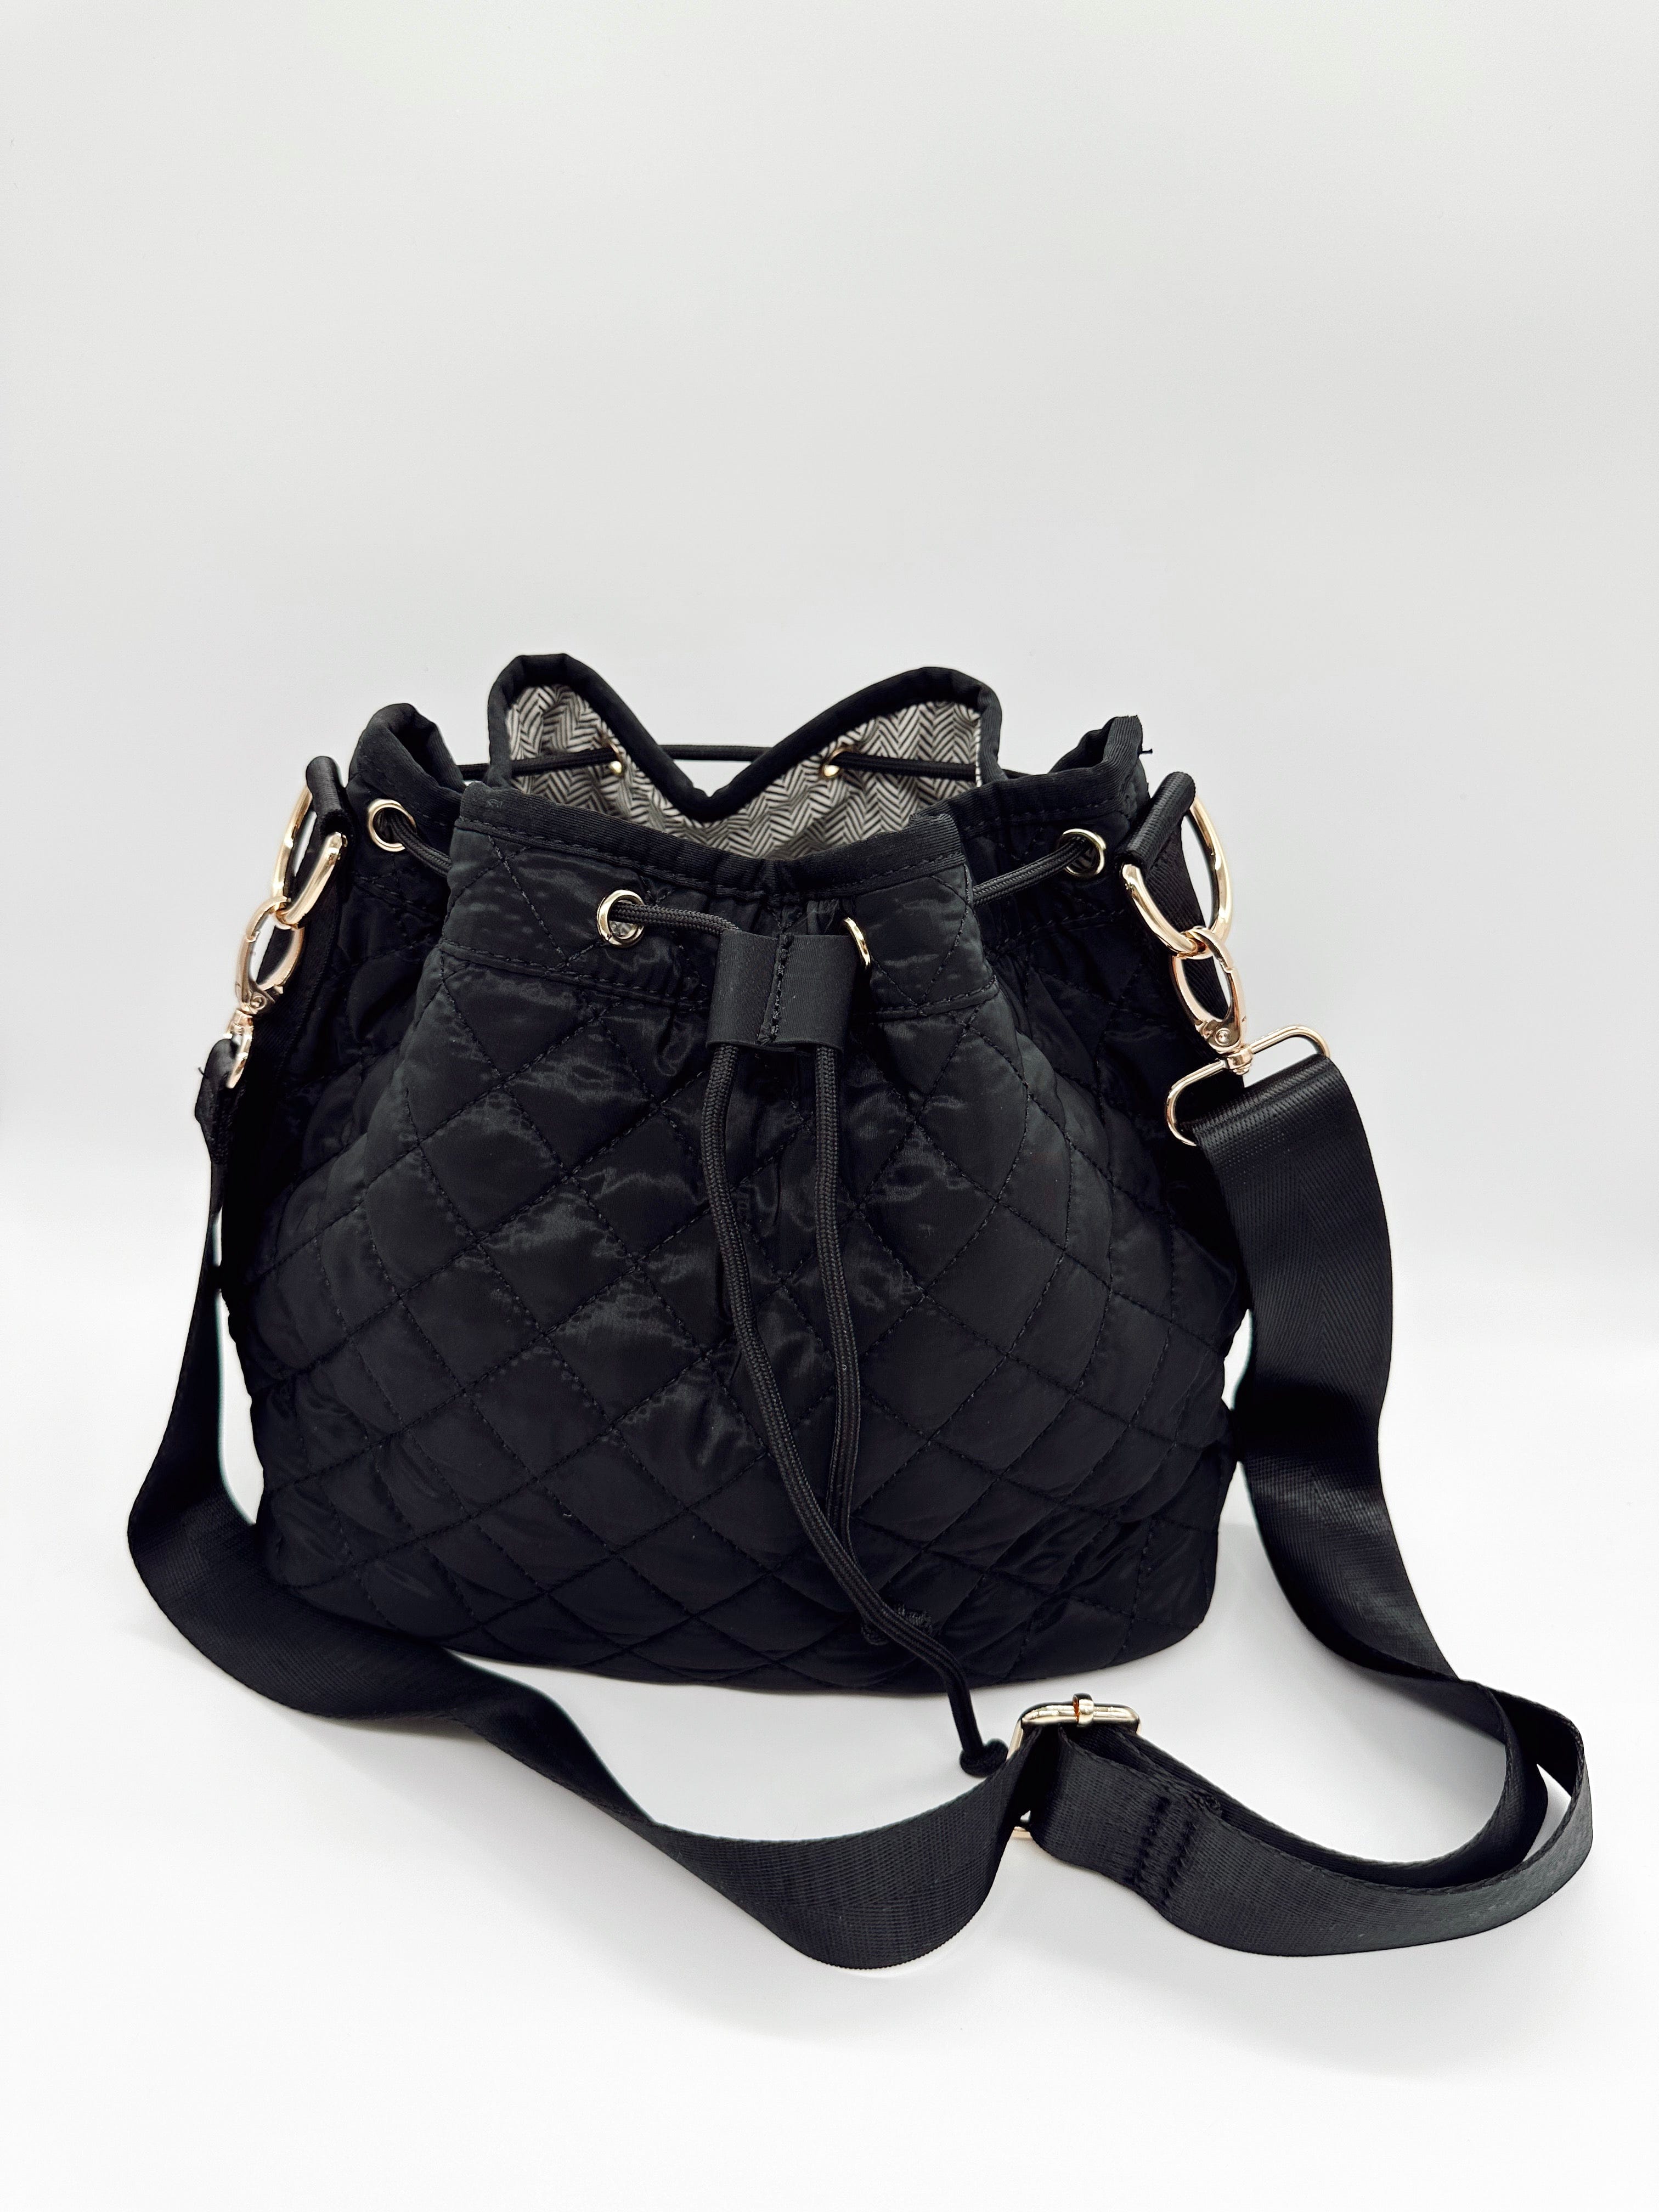 Image of BAG-QUIN-QUI-BLK quilted crossbody